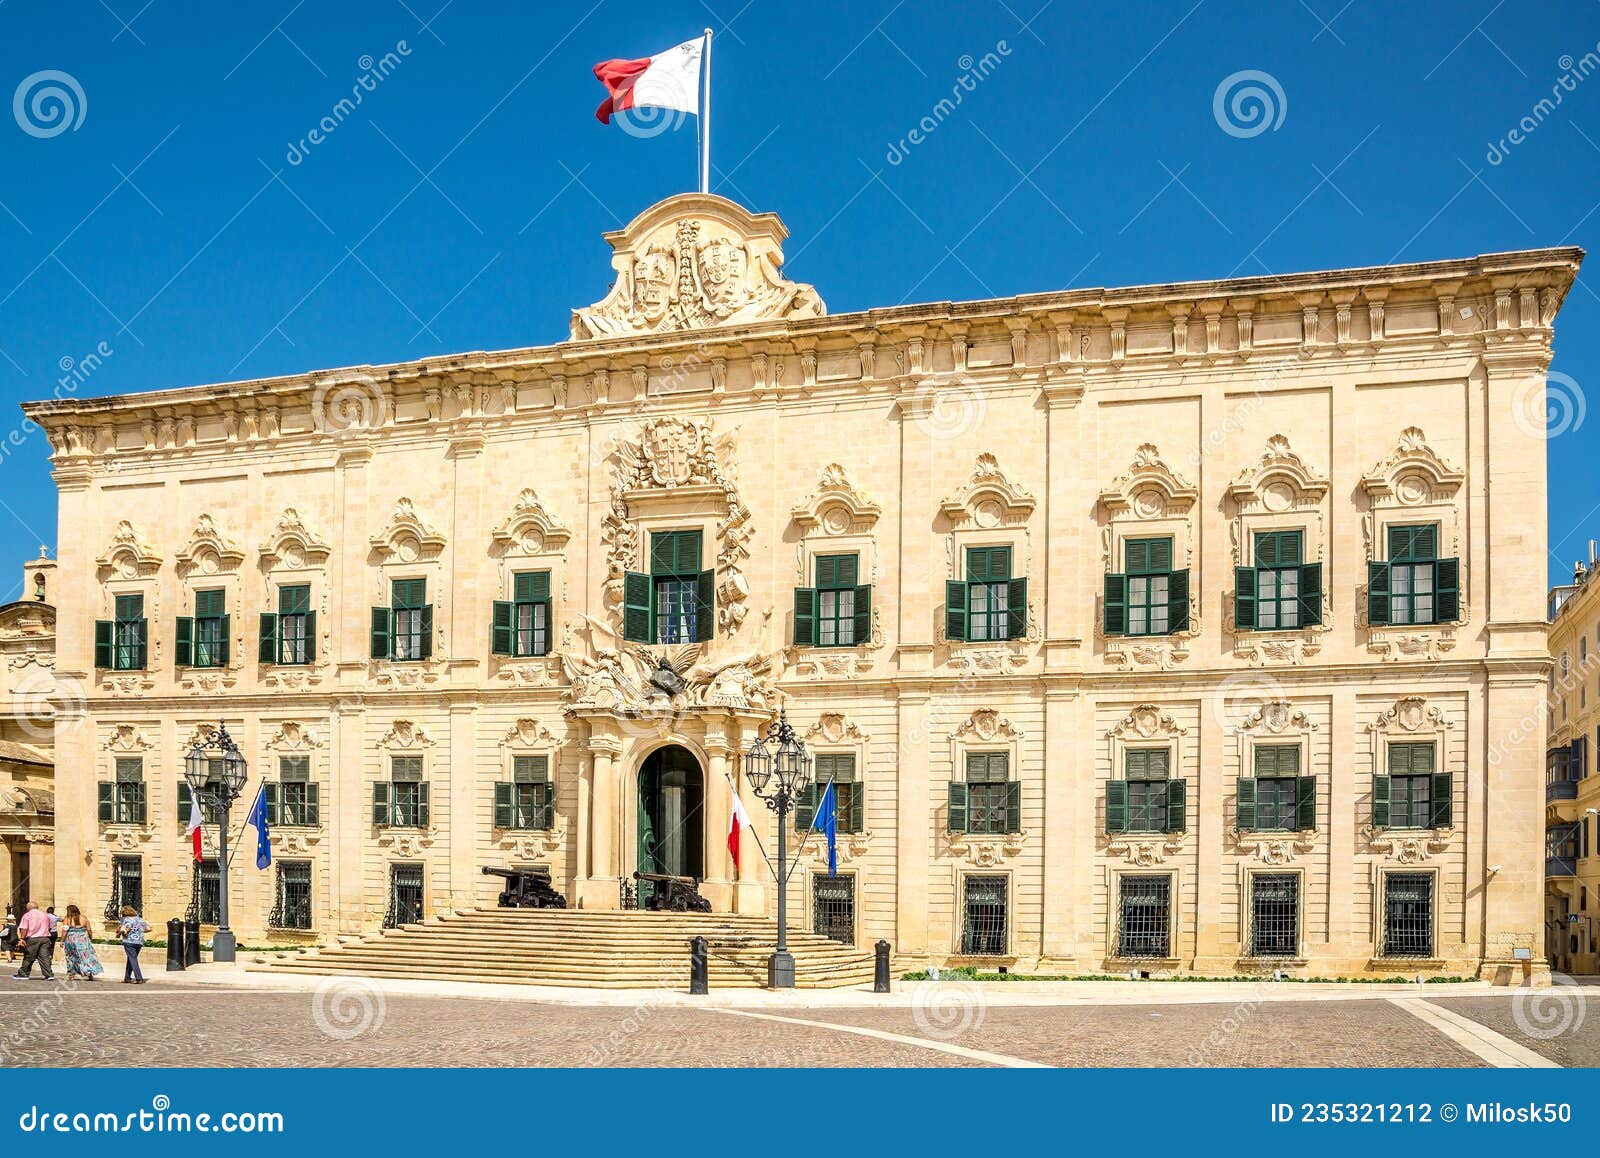 view at the castille palace in the streets of valetta in malta